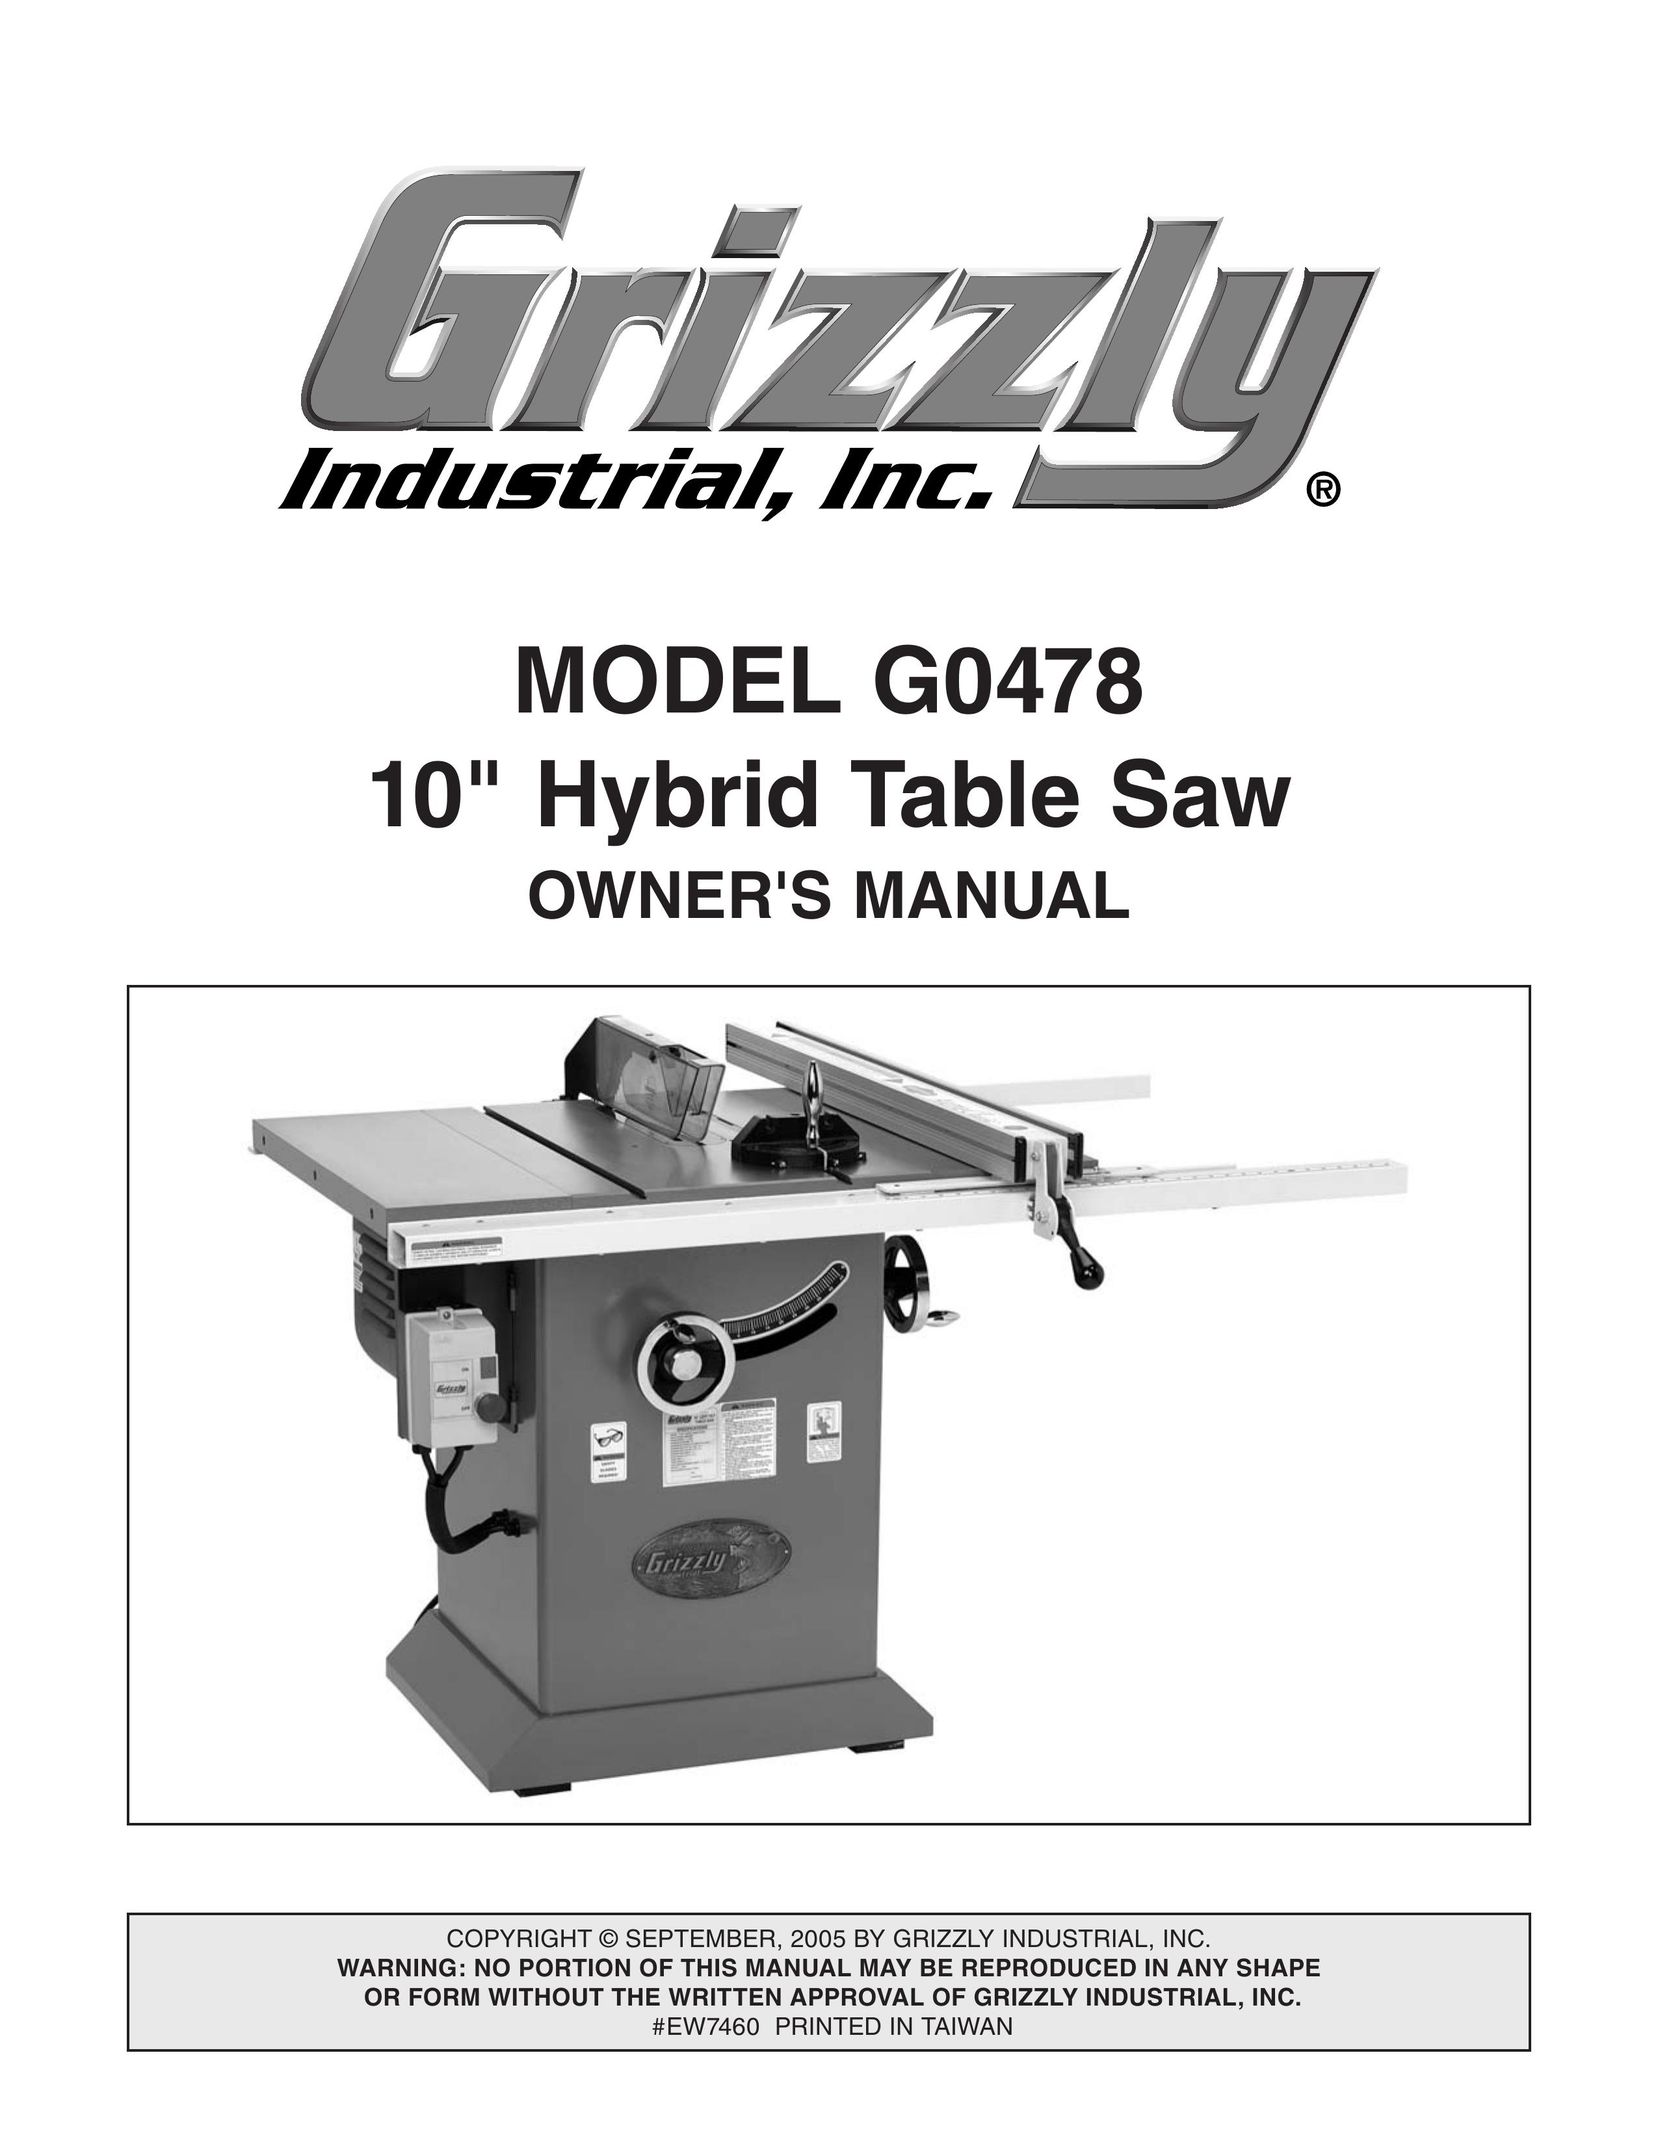 Grizzly G0478 Saw User Manual